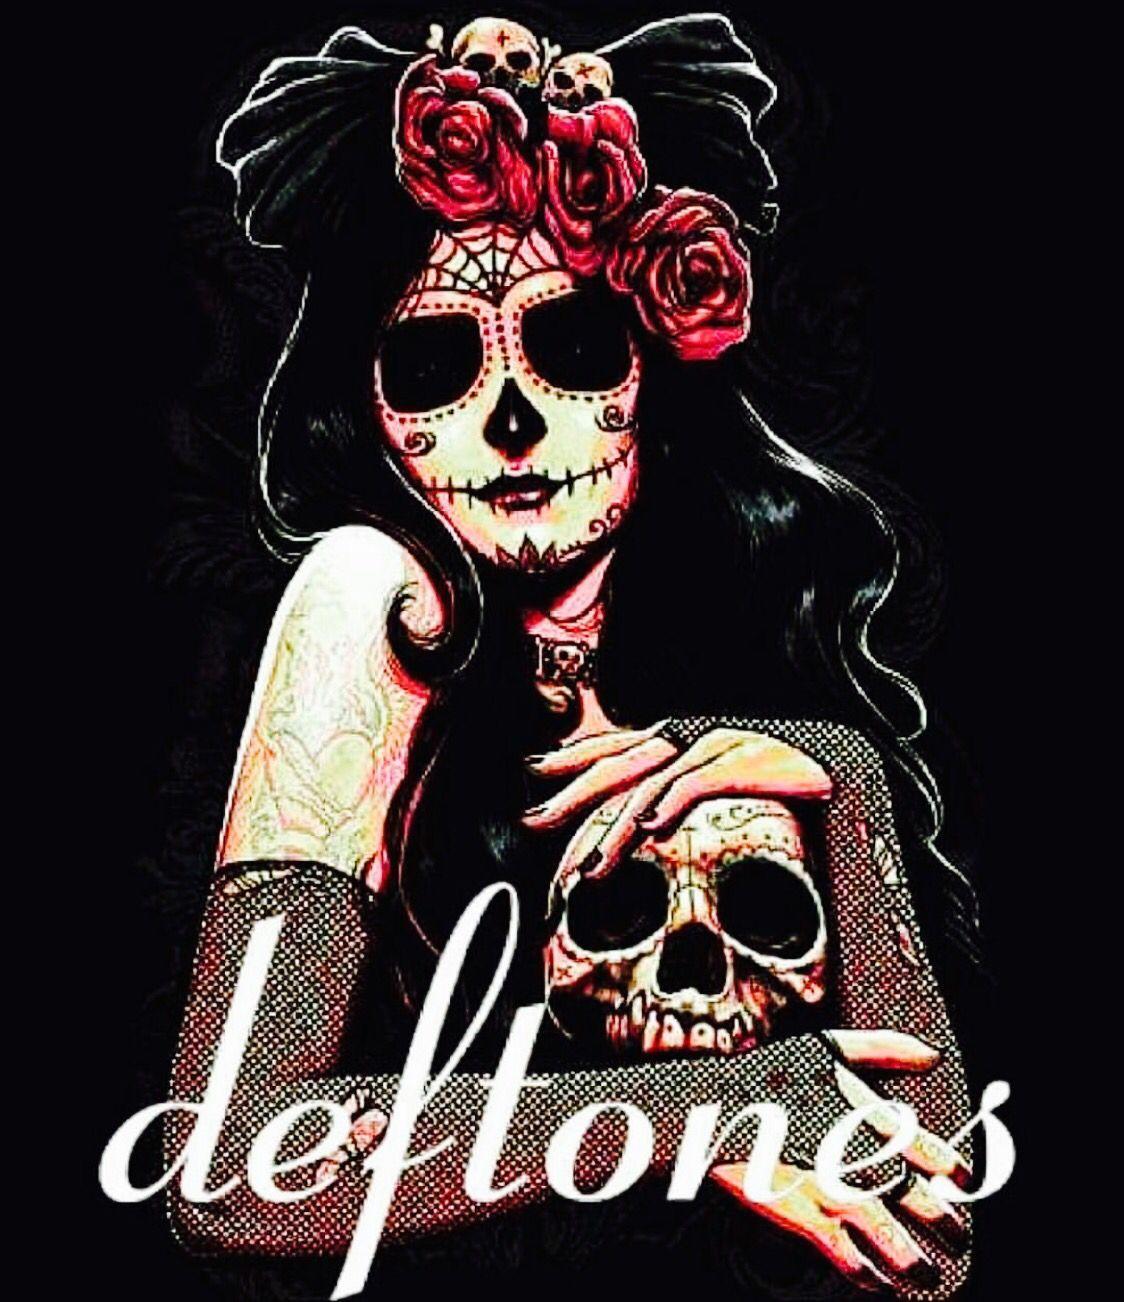 Free download 252012 112100 AM Iphone apps games wallpapers themes No  comments 640x1136 for your Desktop Mobile  Tablet  Explore 49 Deftones  Wallpaper and Themes  Deftones Wallpapers Deftones Wallpaper Ps3  Wallpapers And Themes